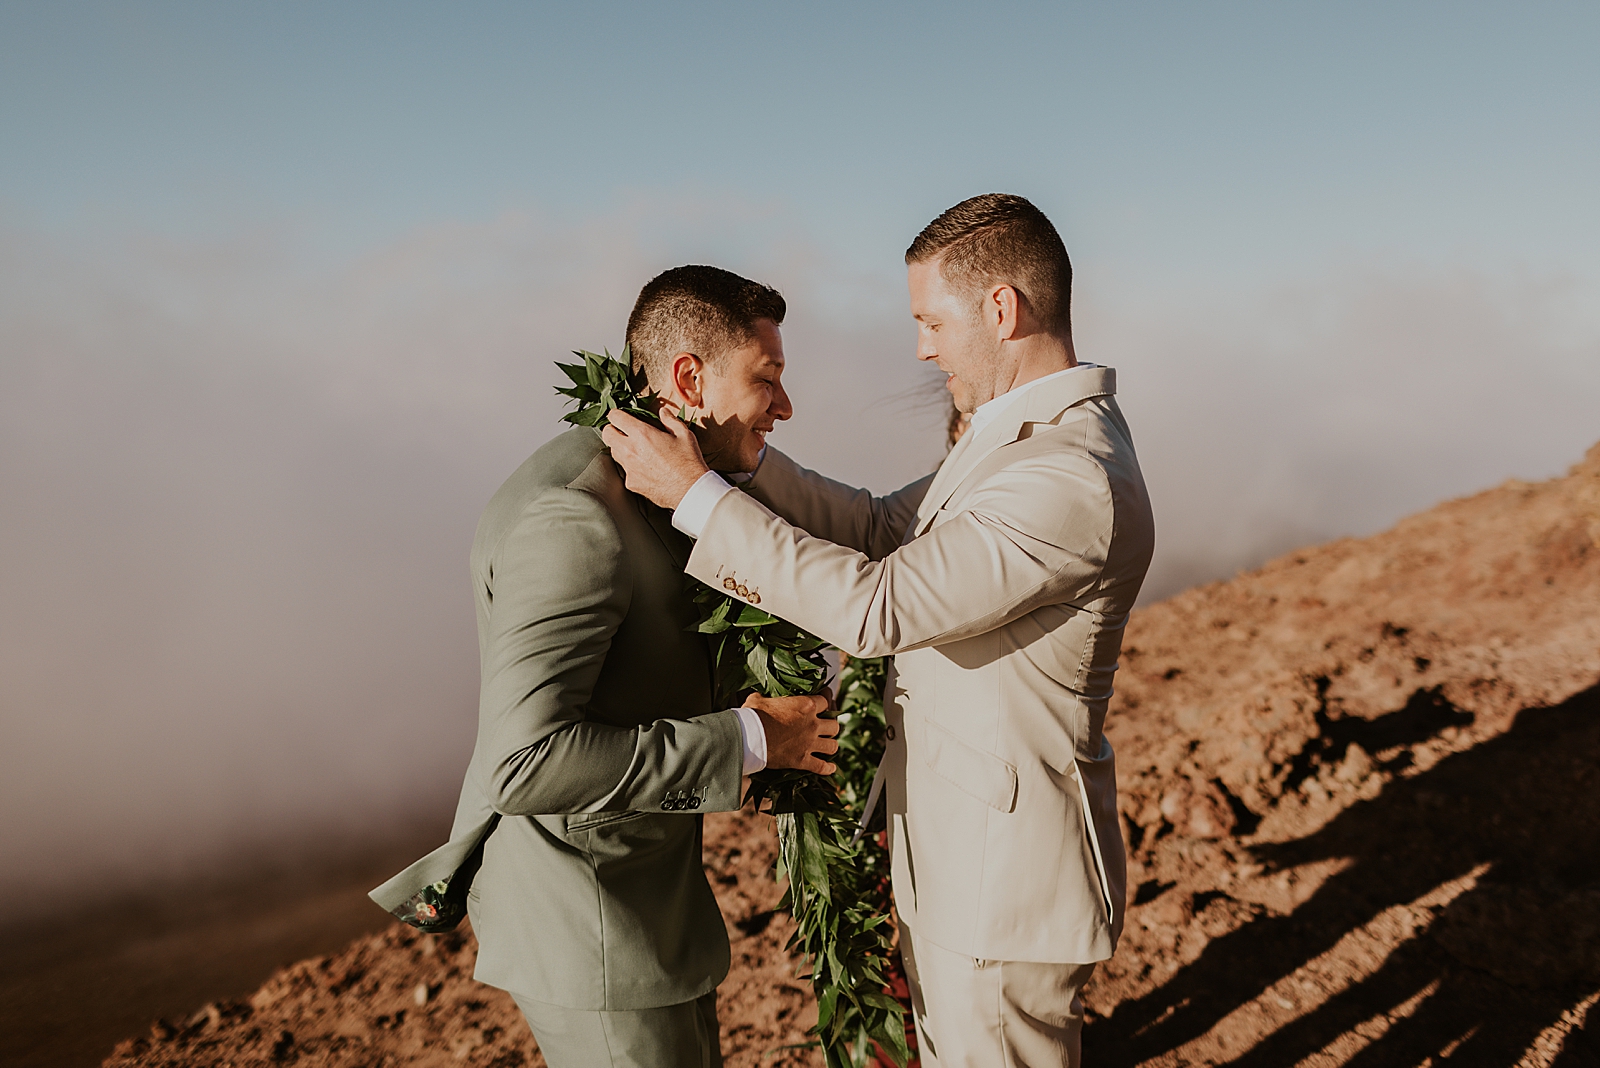 Grooms putting leis on each other for Elopement Ceremony